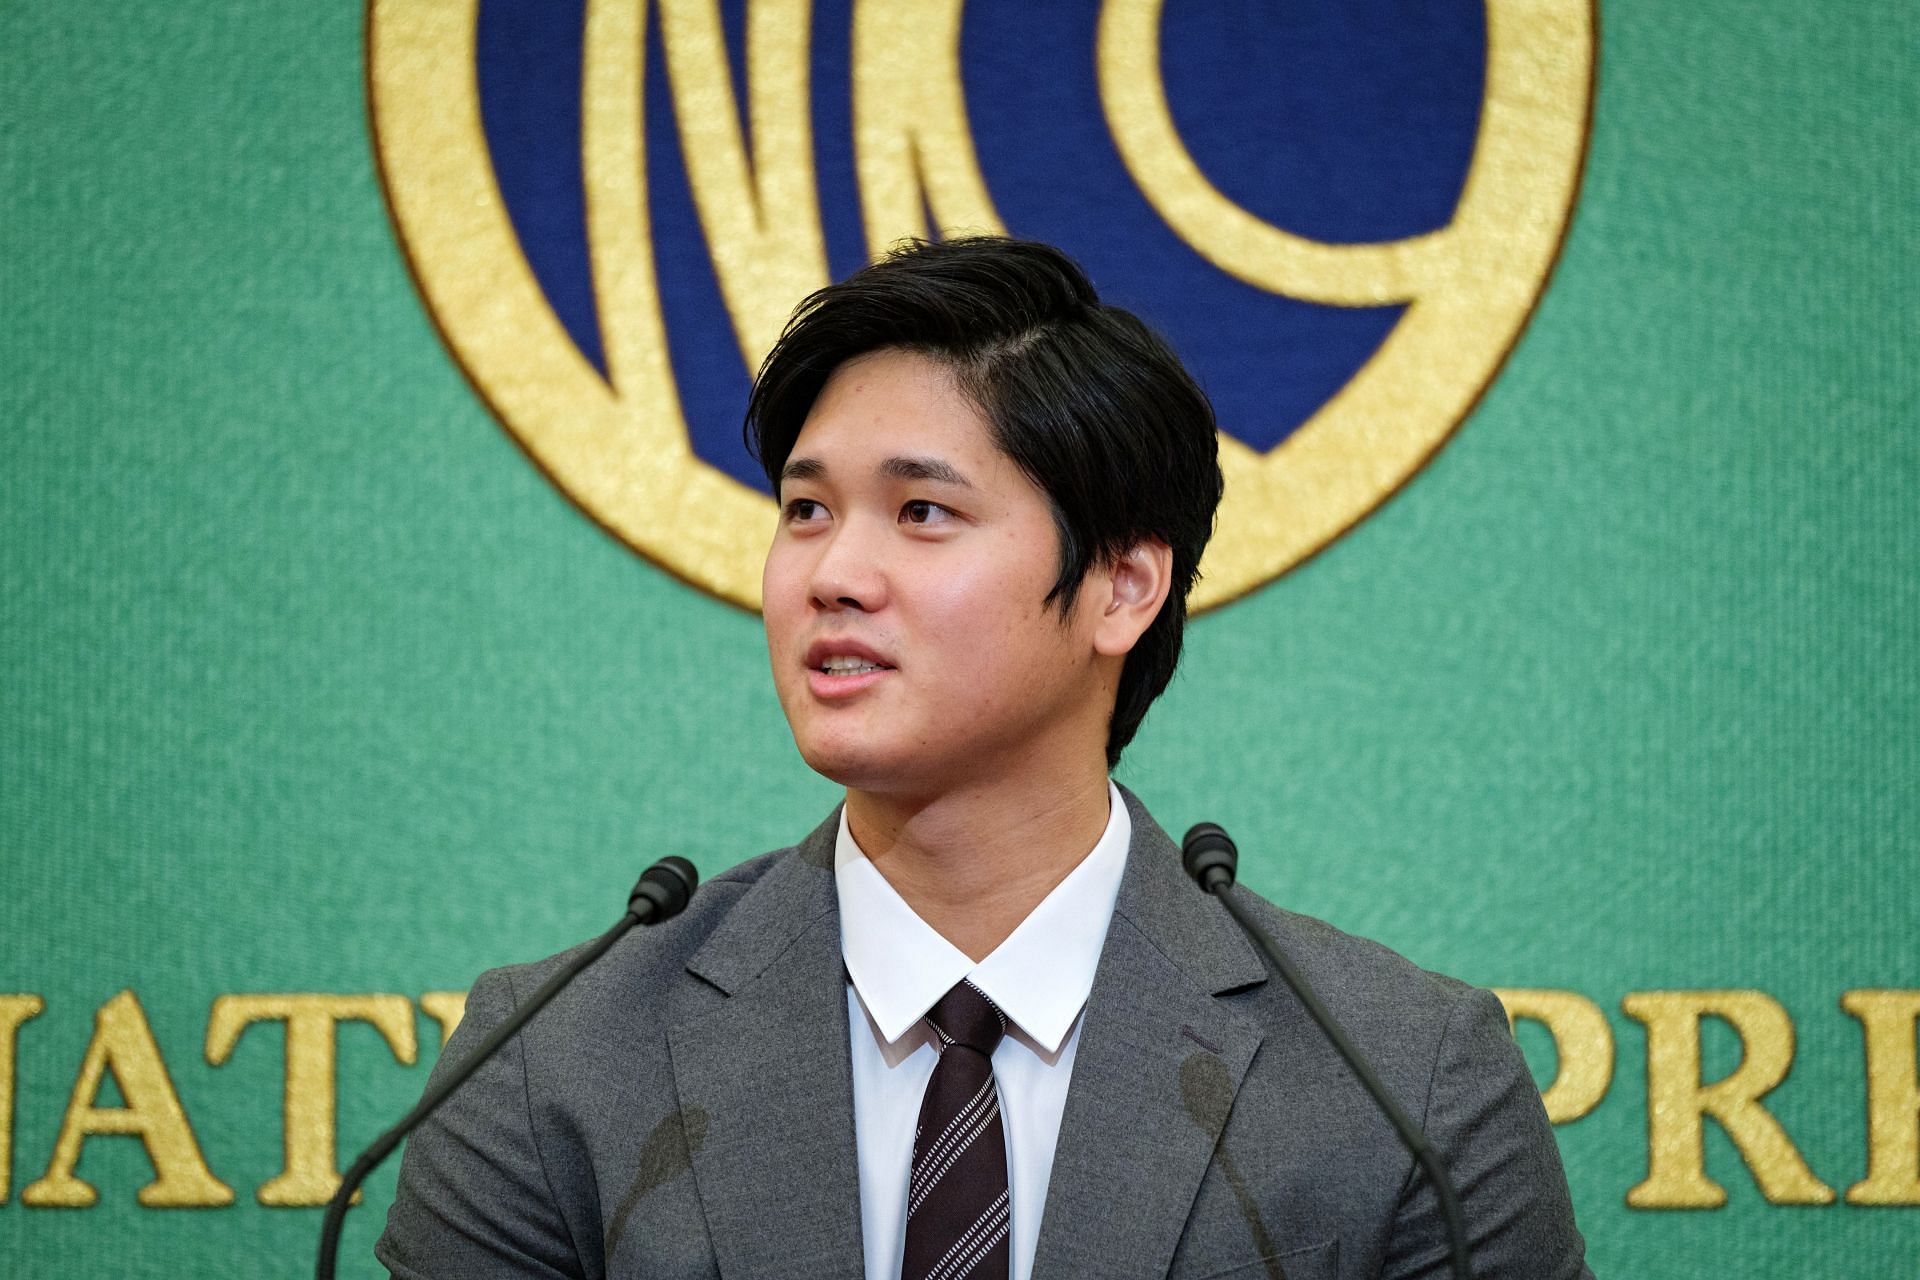 Shohei Ohtani Being announcing his signing on Mike Trouts wedding day